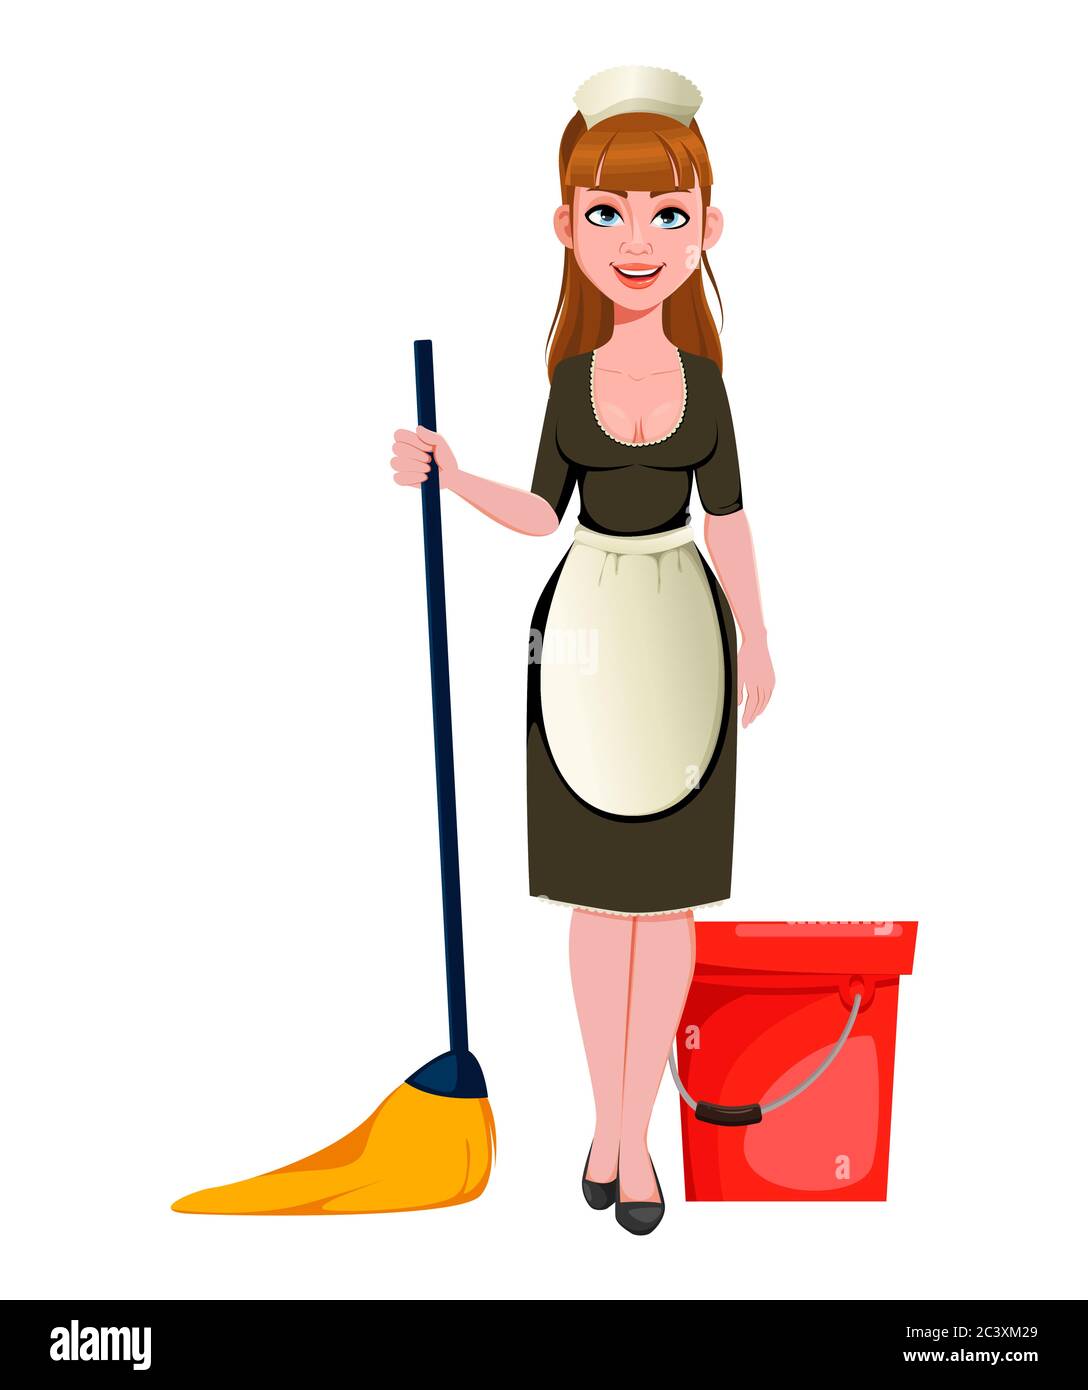 Maid, cleaning lady, smiling cleaning woman mops the floor. Cheerful housemaid cartoon character. Vector illustration Stock Vector